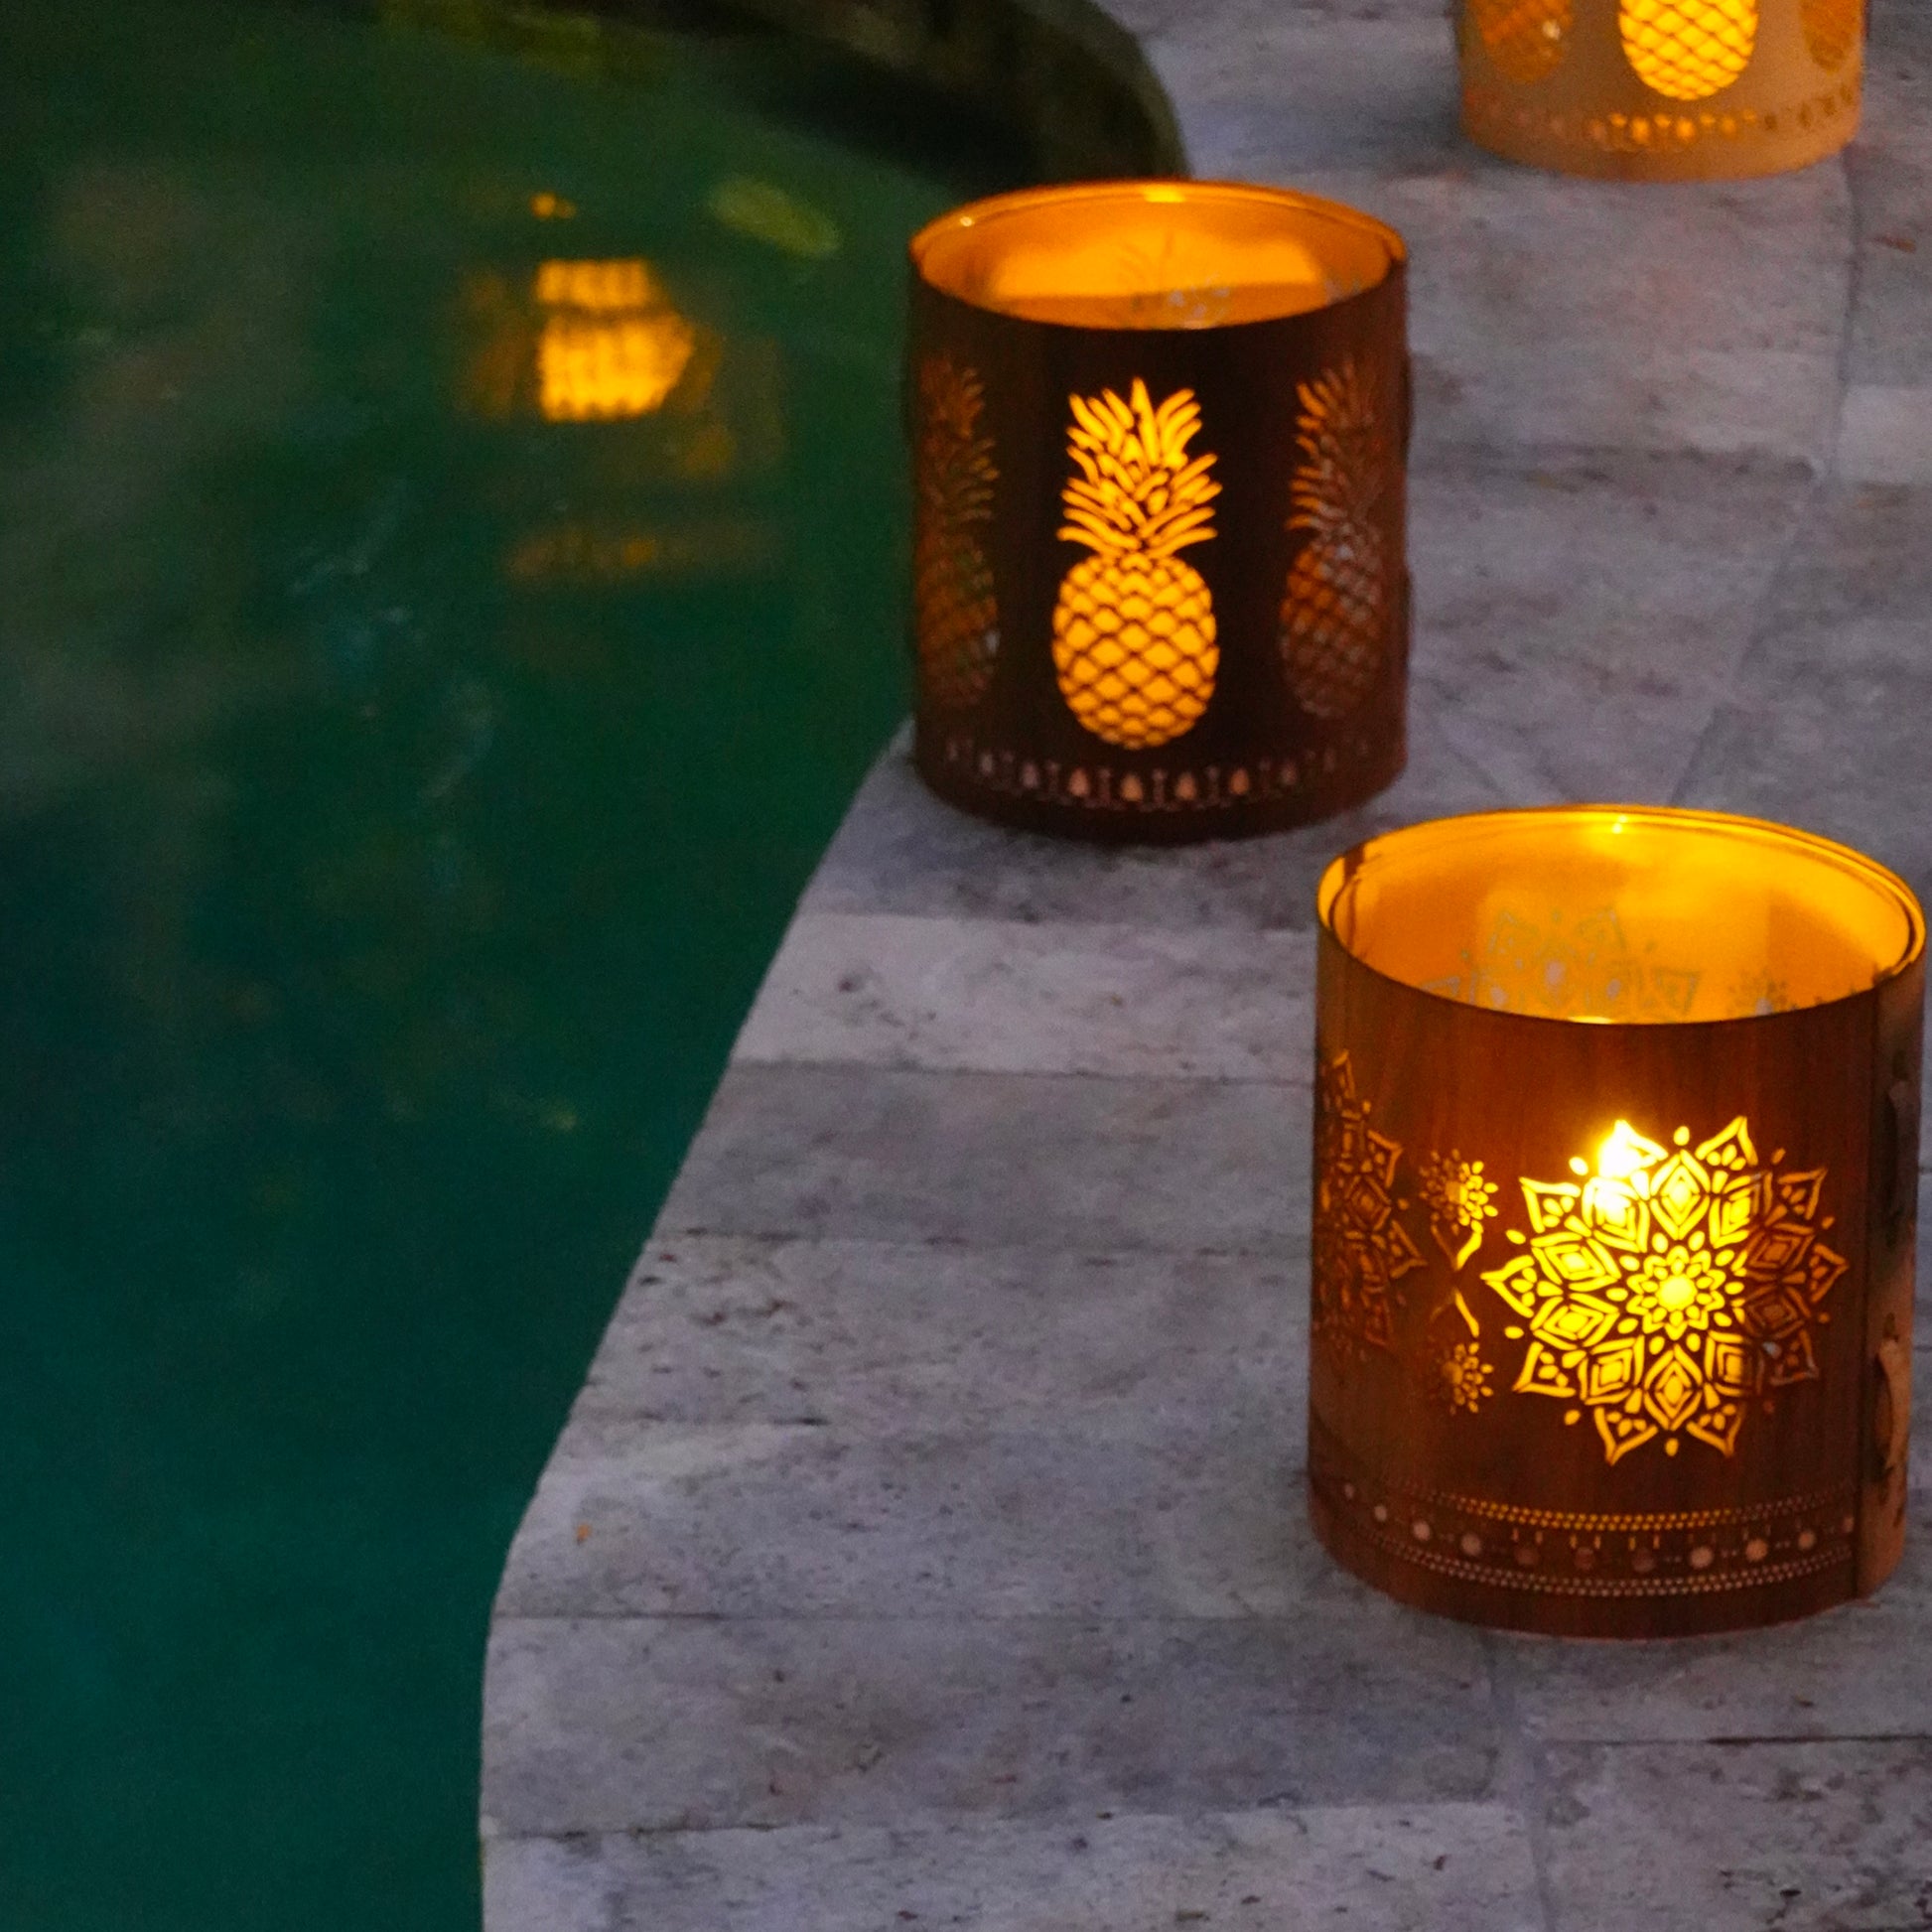 The pineapple lantern - a welcoming tradition in glass and wood-maple,White Oak,or walnut